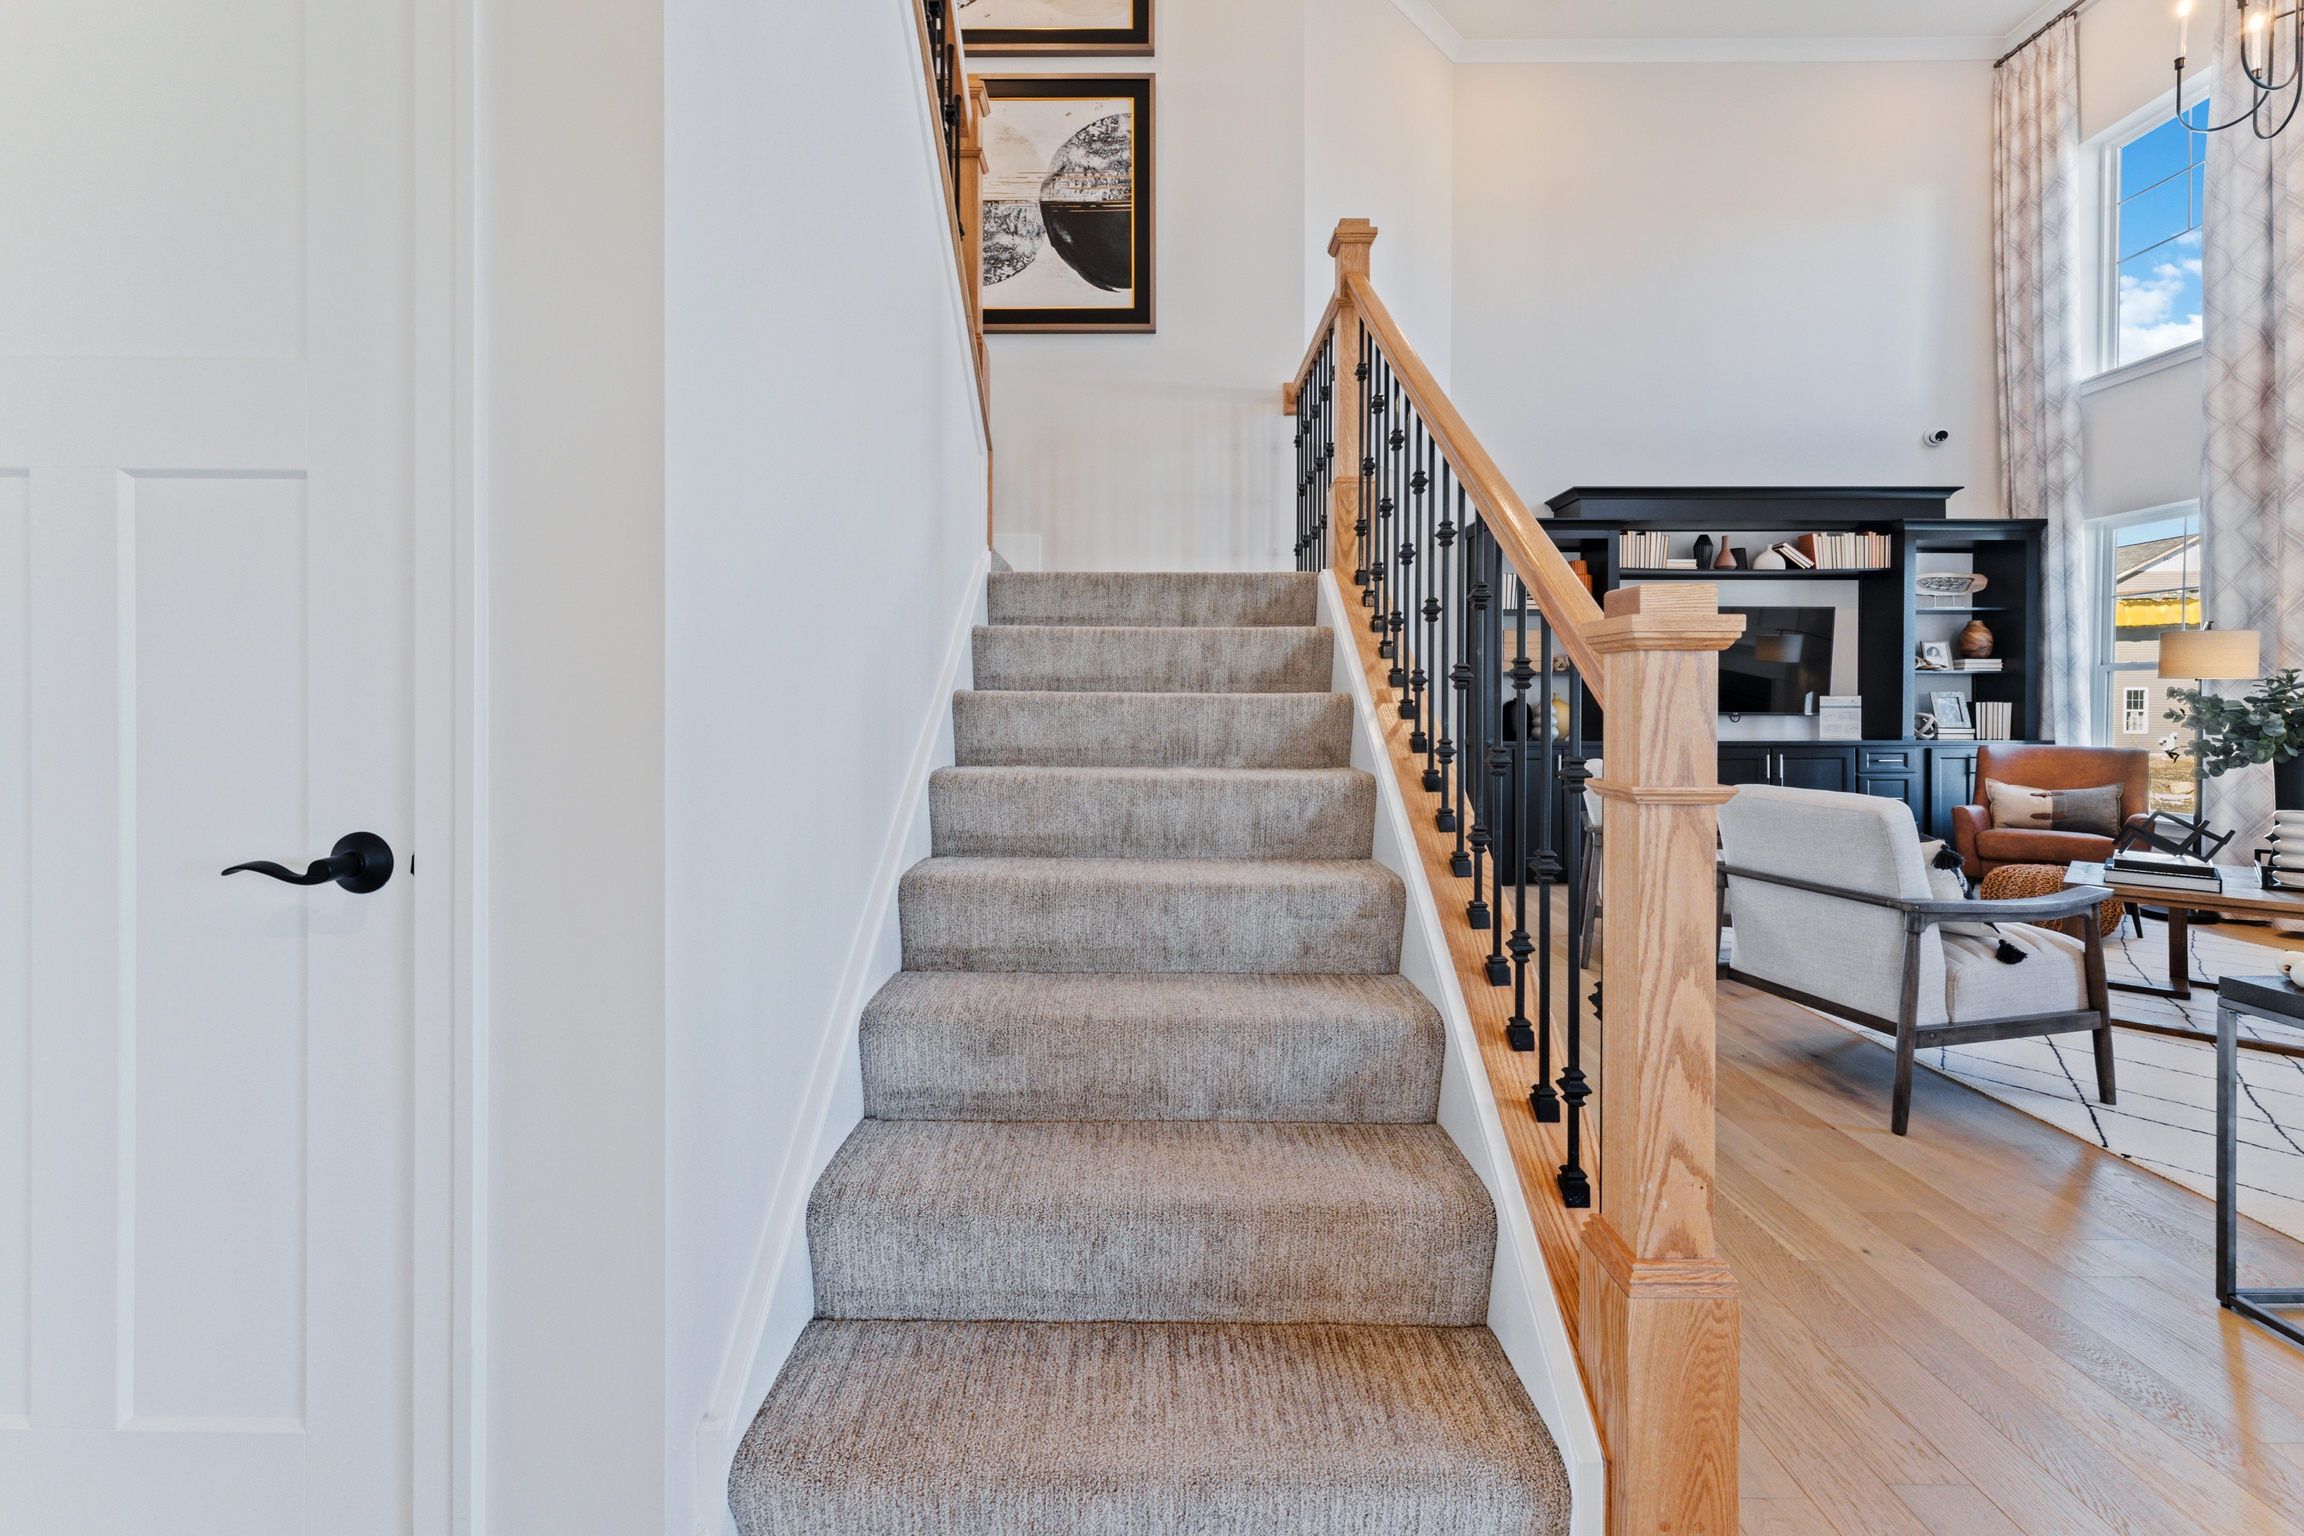 Carpeted staircase in a house heading upstairs with black spindles and a wood banister